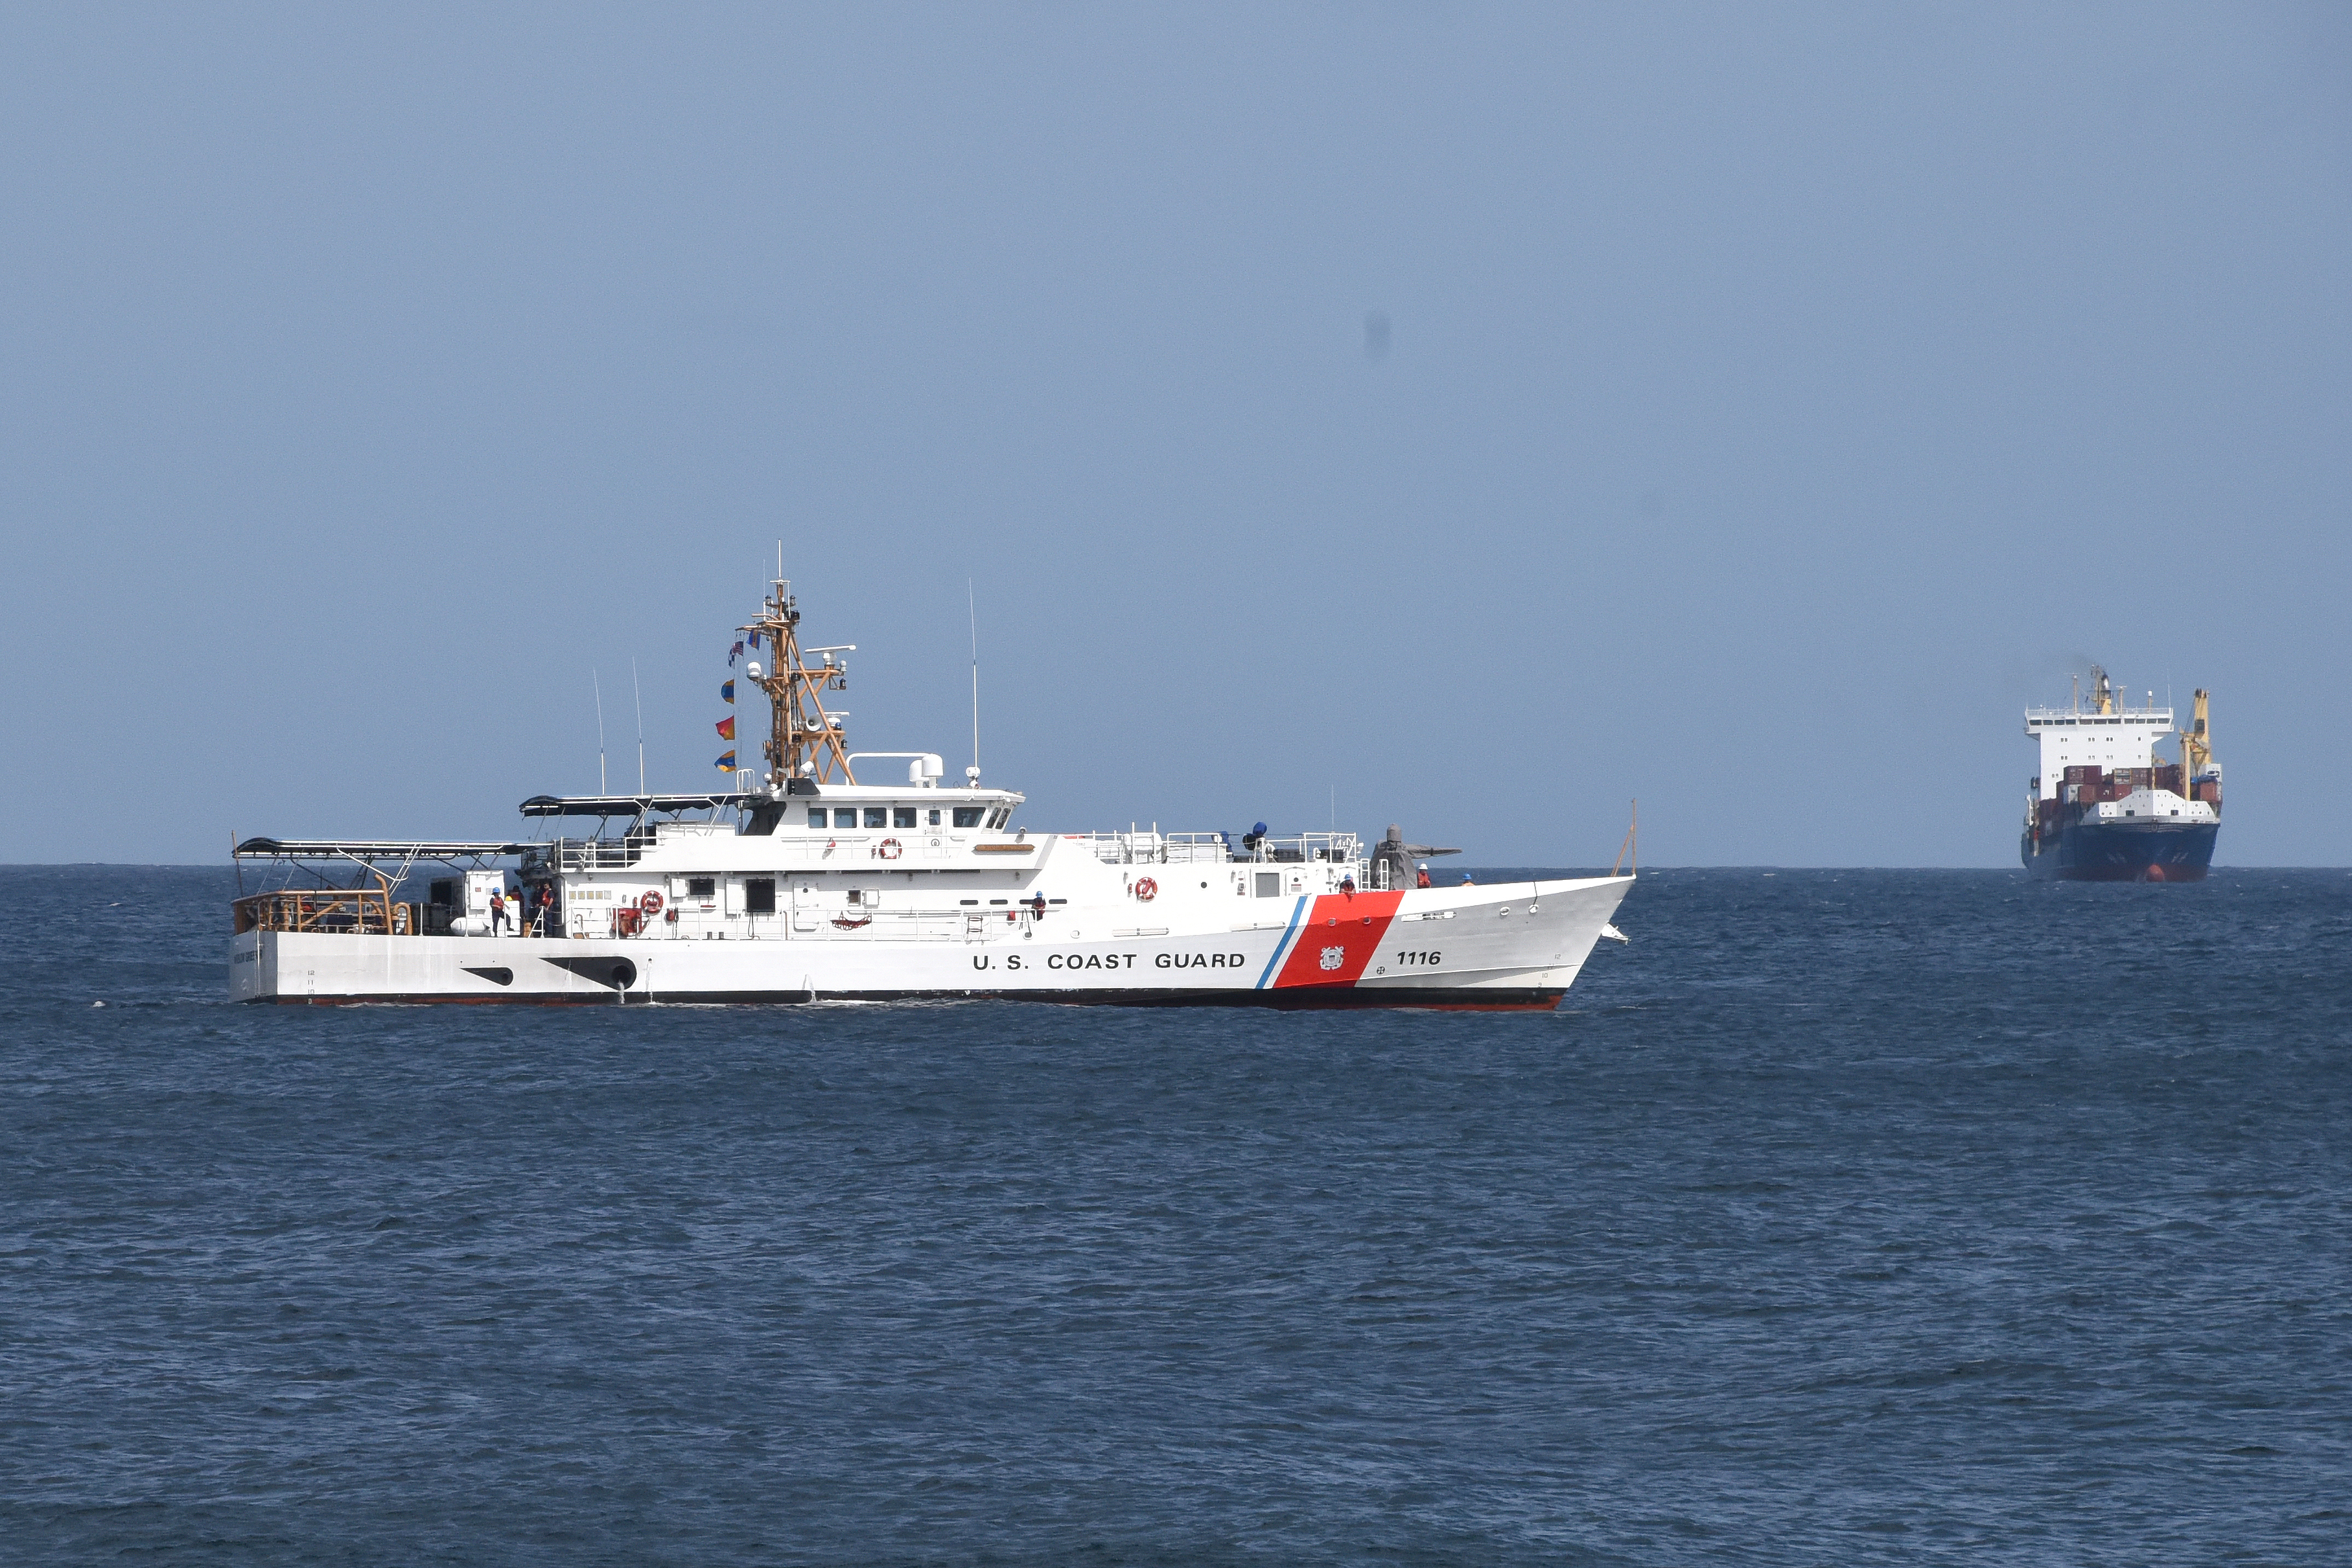 US Coast Guard Cutter William Griesser under way before the casualty.